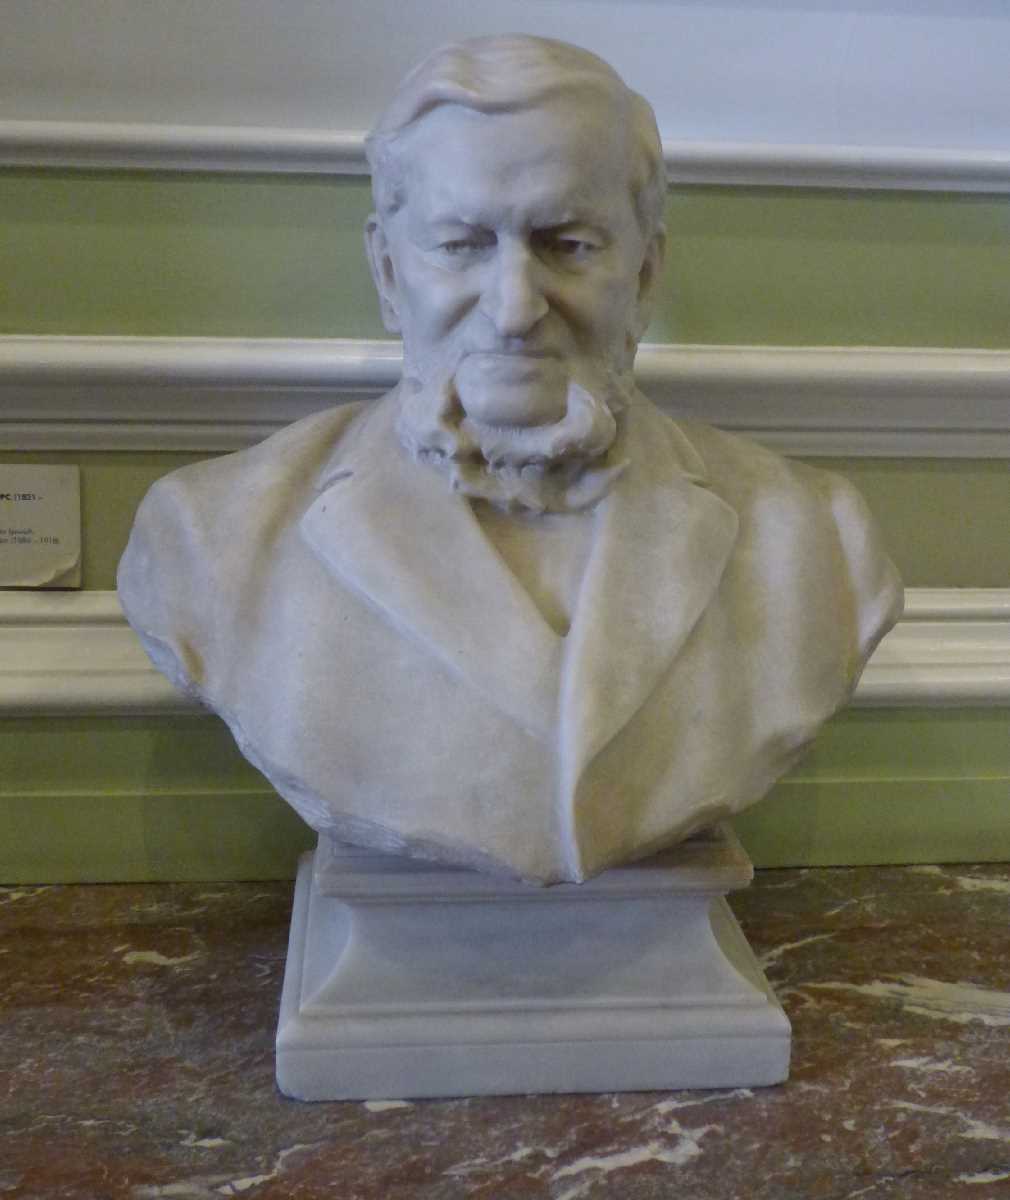 Busts, statues and portraits in the Birmingham Council House